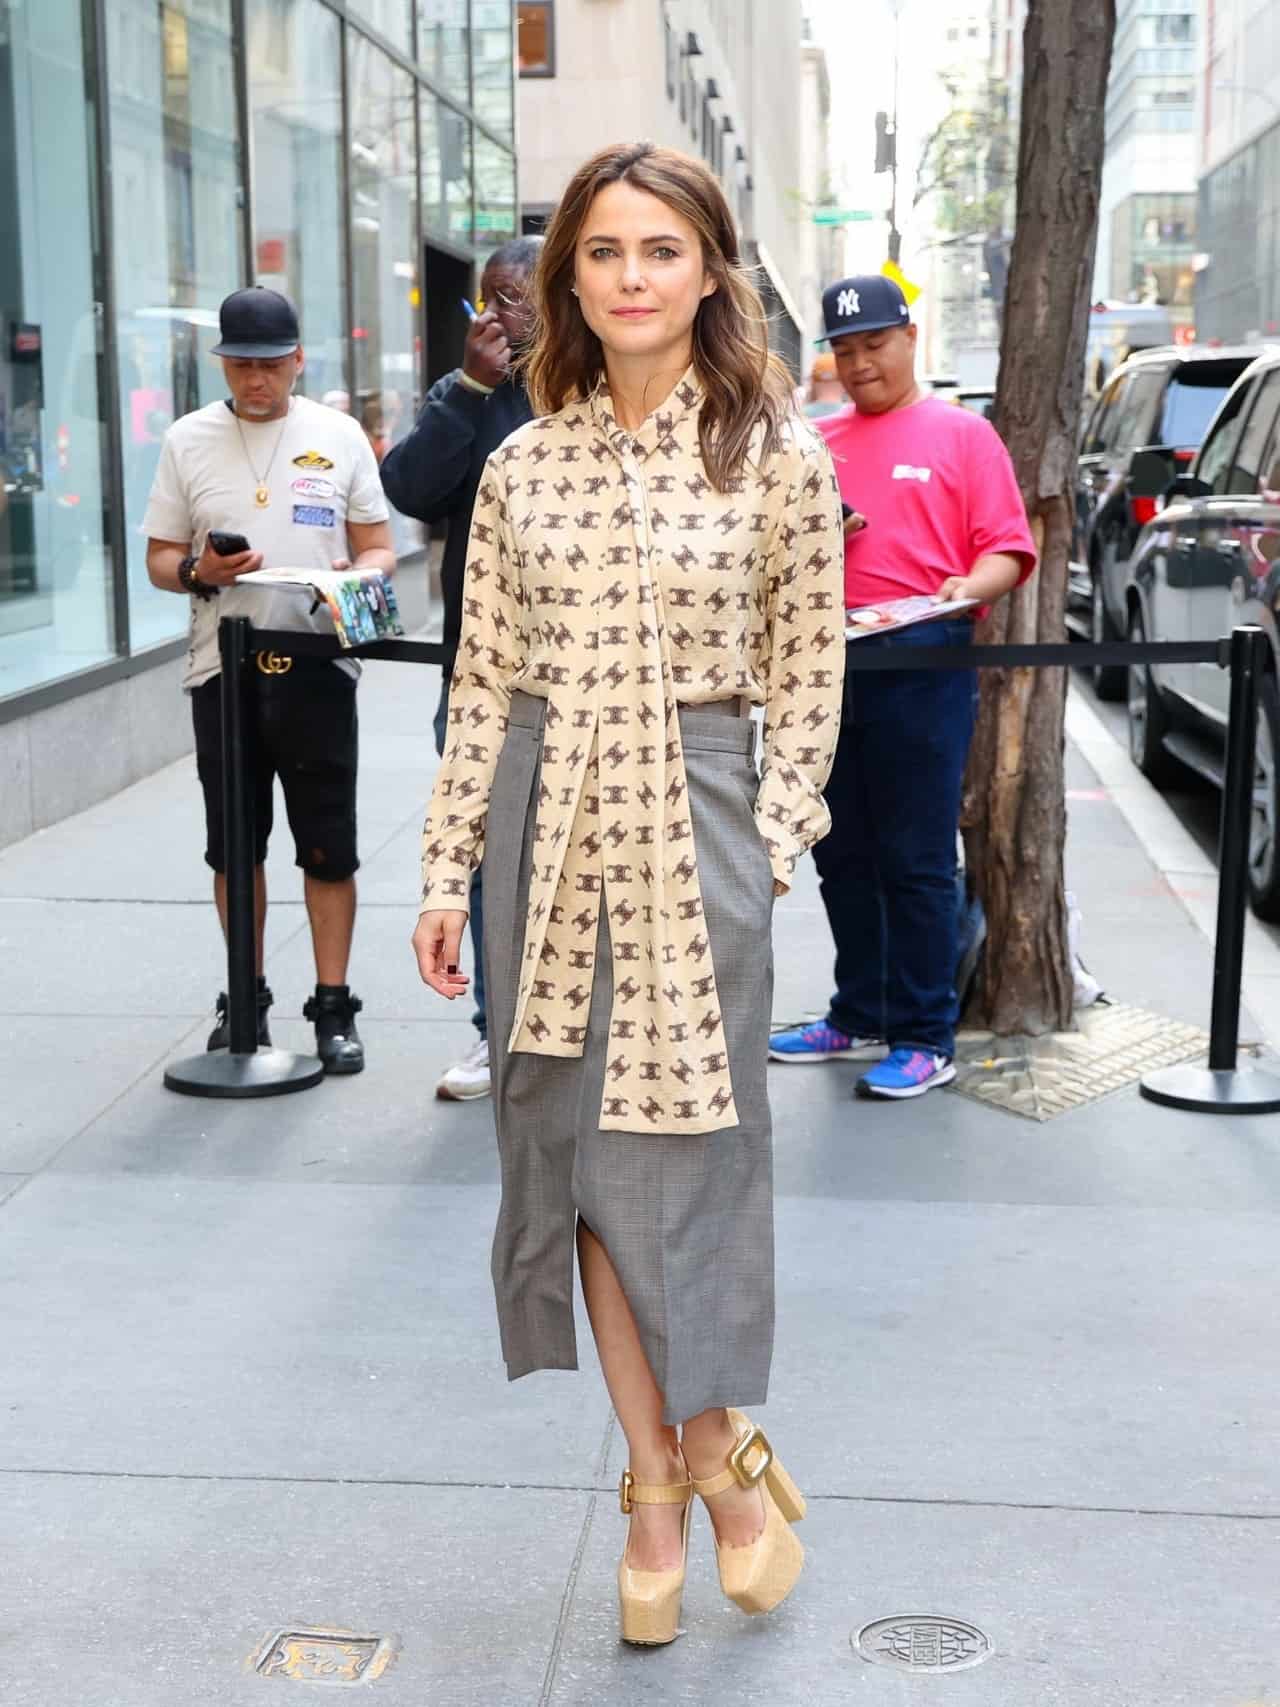 Keri Russell Promotes The Diplomat in Chic Style at Today Studios NYC